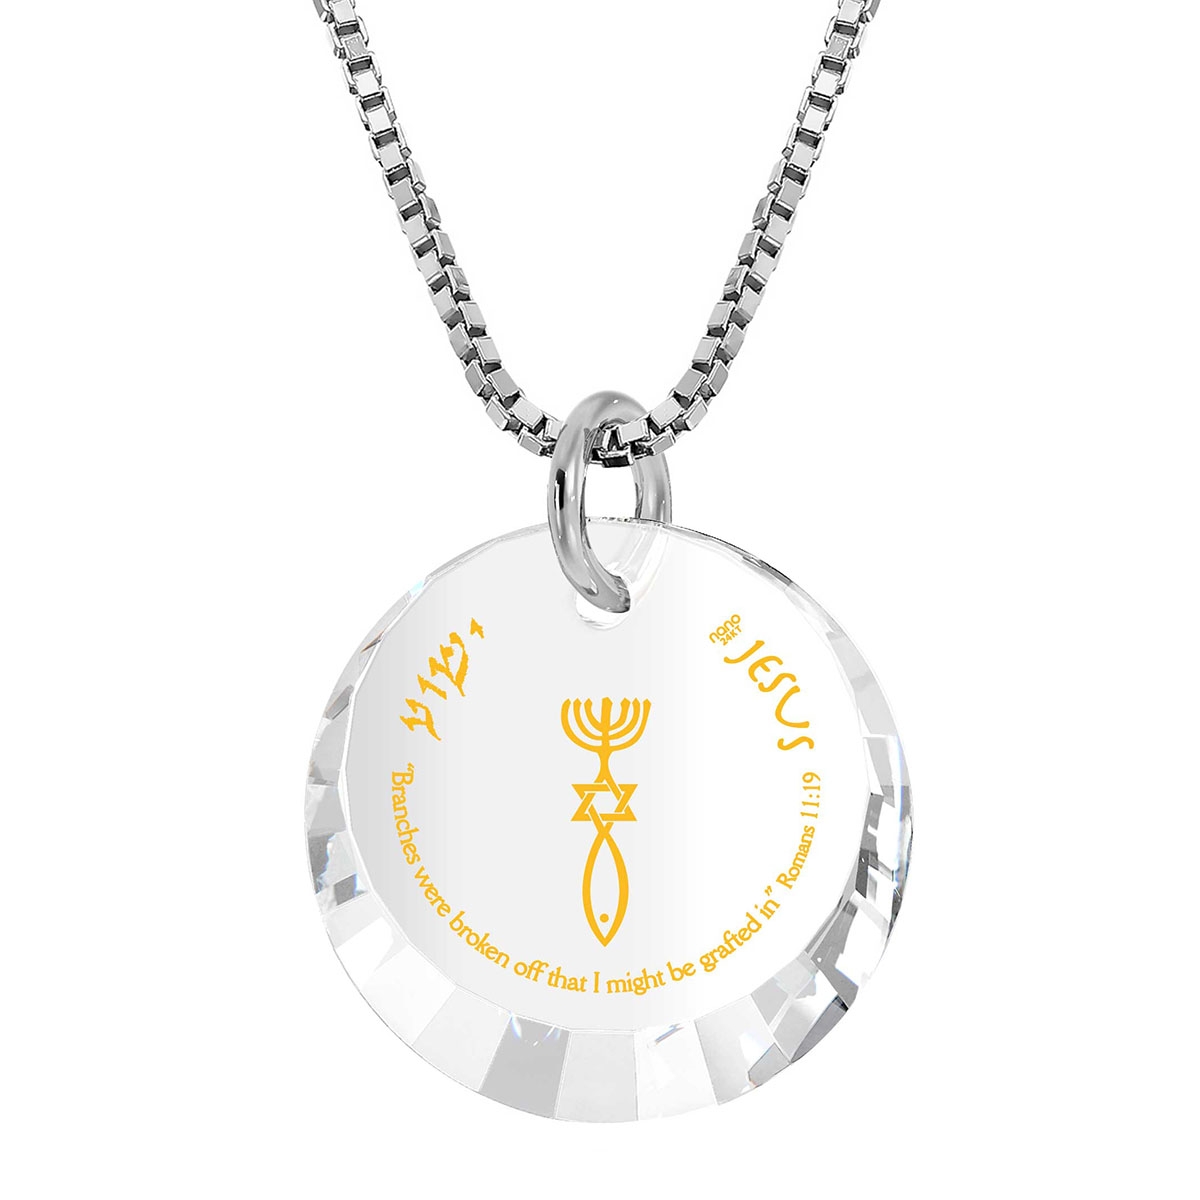 Nano Jewelry Sterling Silver & Gemstone Grafted-In Necklace with 24k Gold Micro-Inscription - Choice of Color - 1